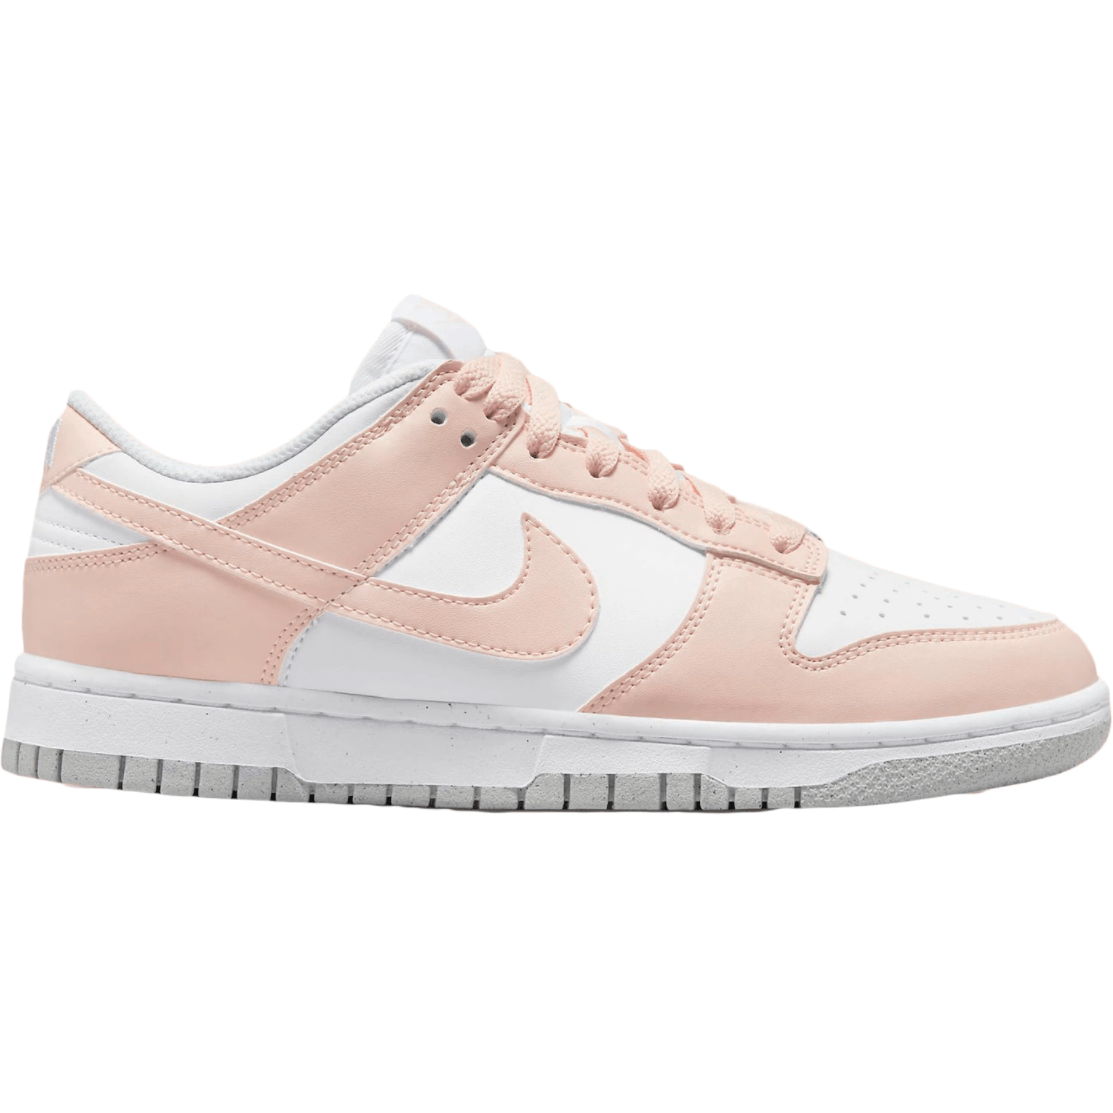 NIKE - Dunk Low Move to Zero "Pale Coral" - THE GAME